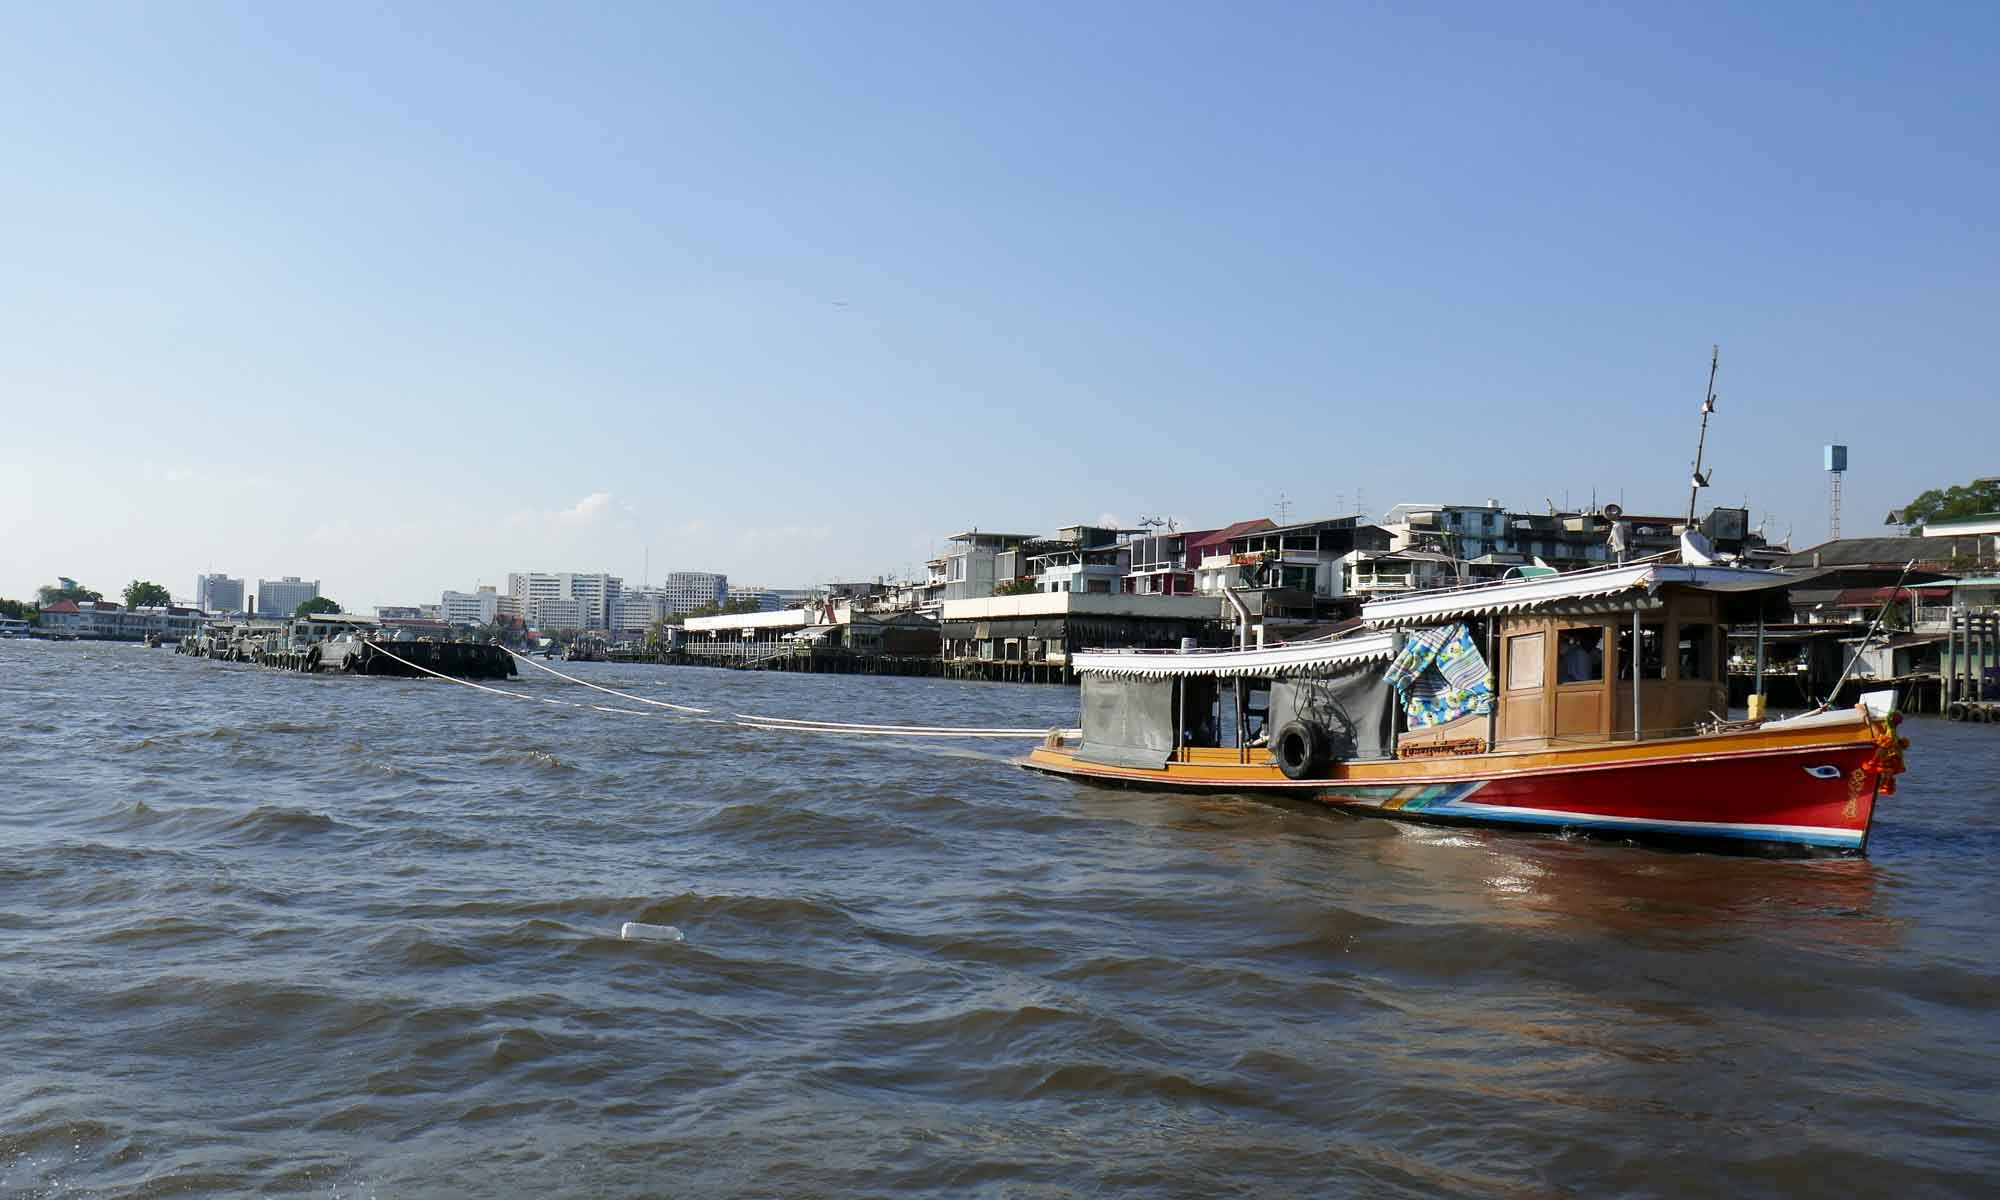 Freight traffic on the Chao Phraya river